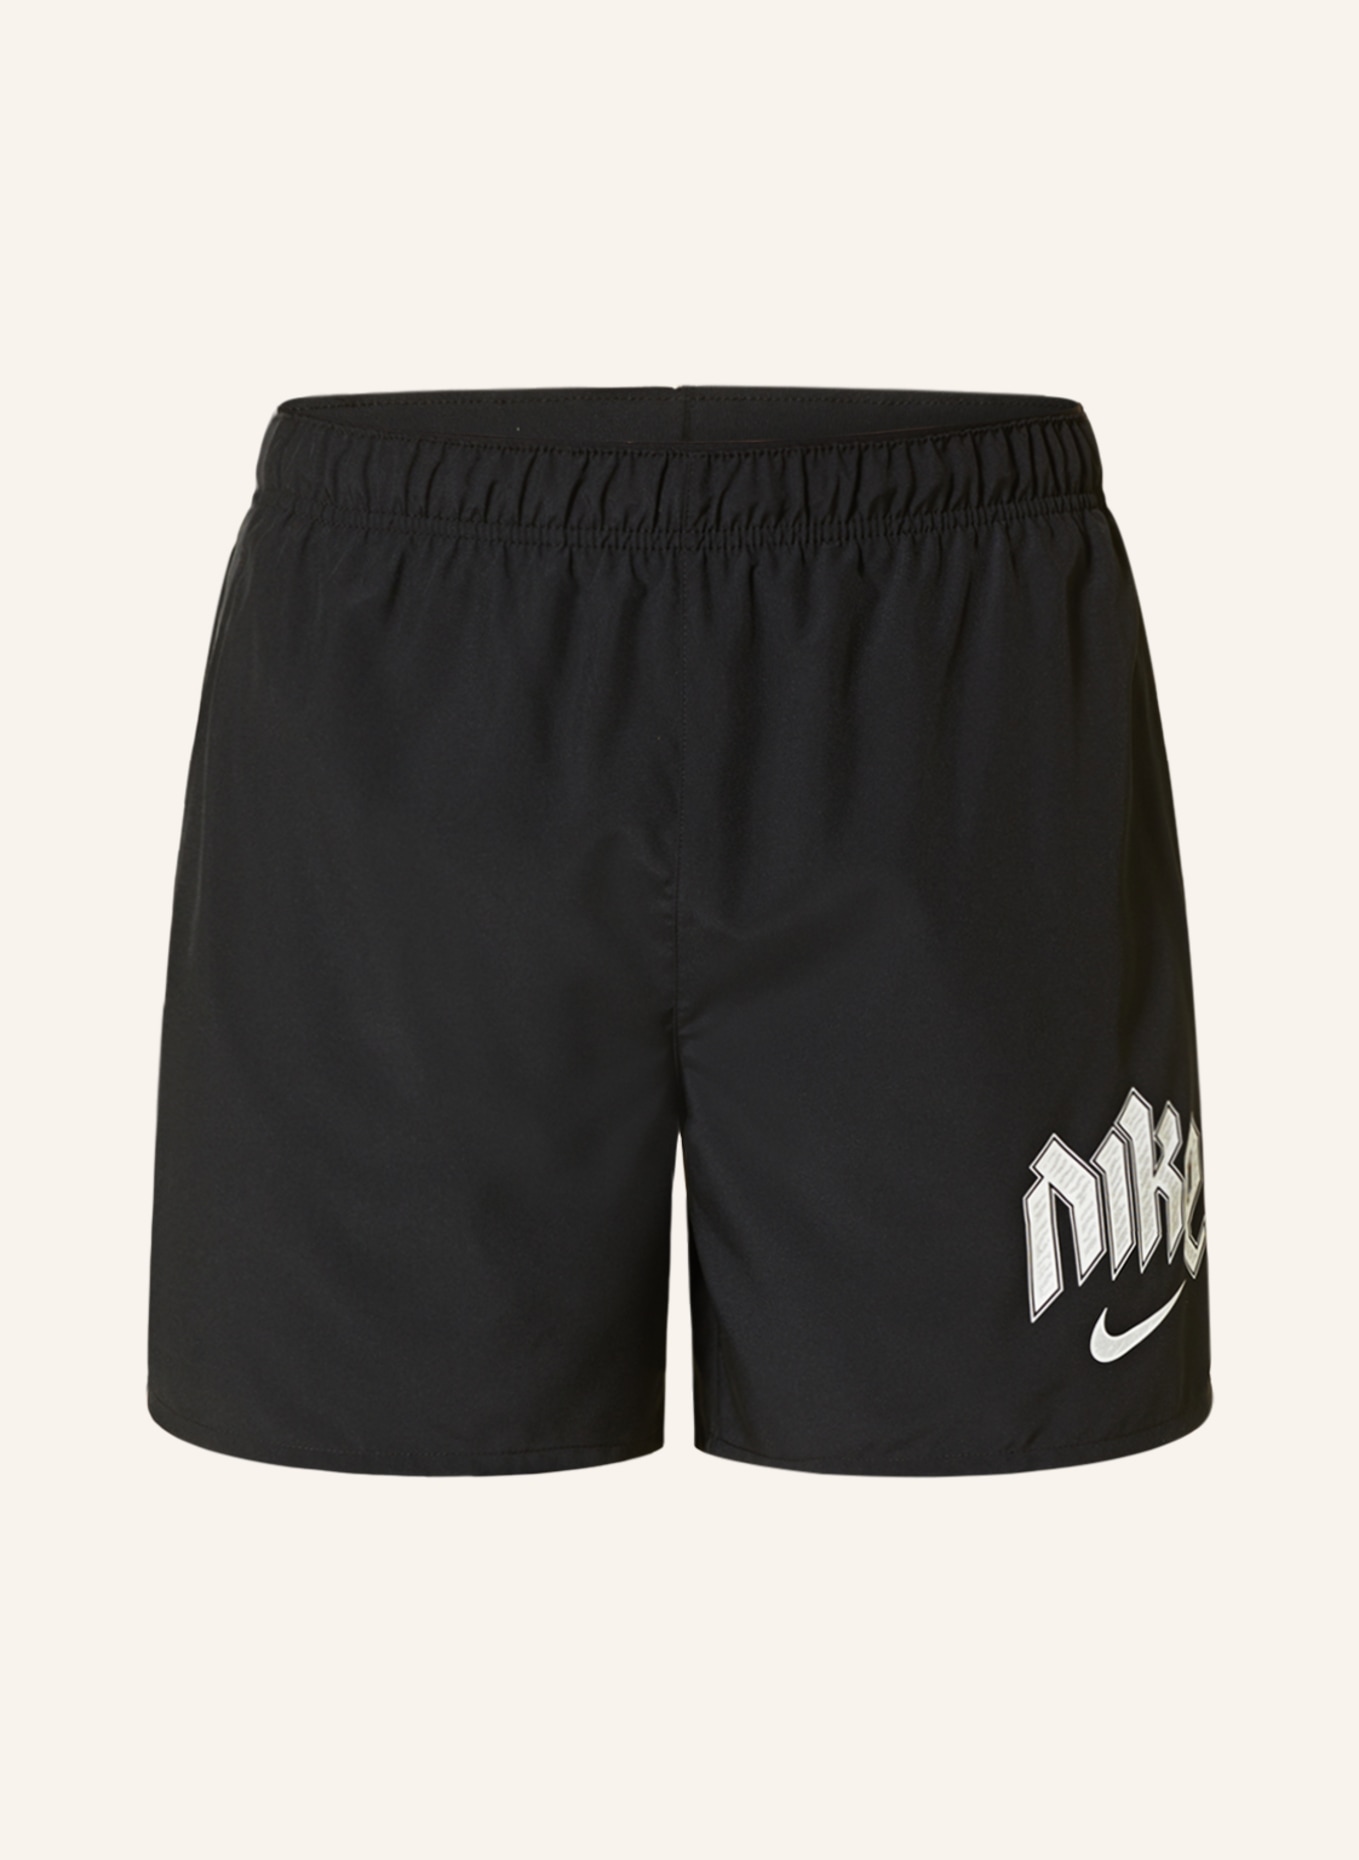 Nike 2-in-1 running shorts DRI-FIT RUN DIVISION CHALLENGE with mesh, Color: BLACK (Image 1)